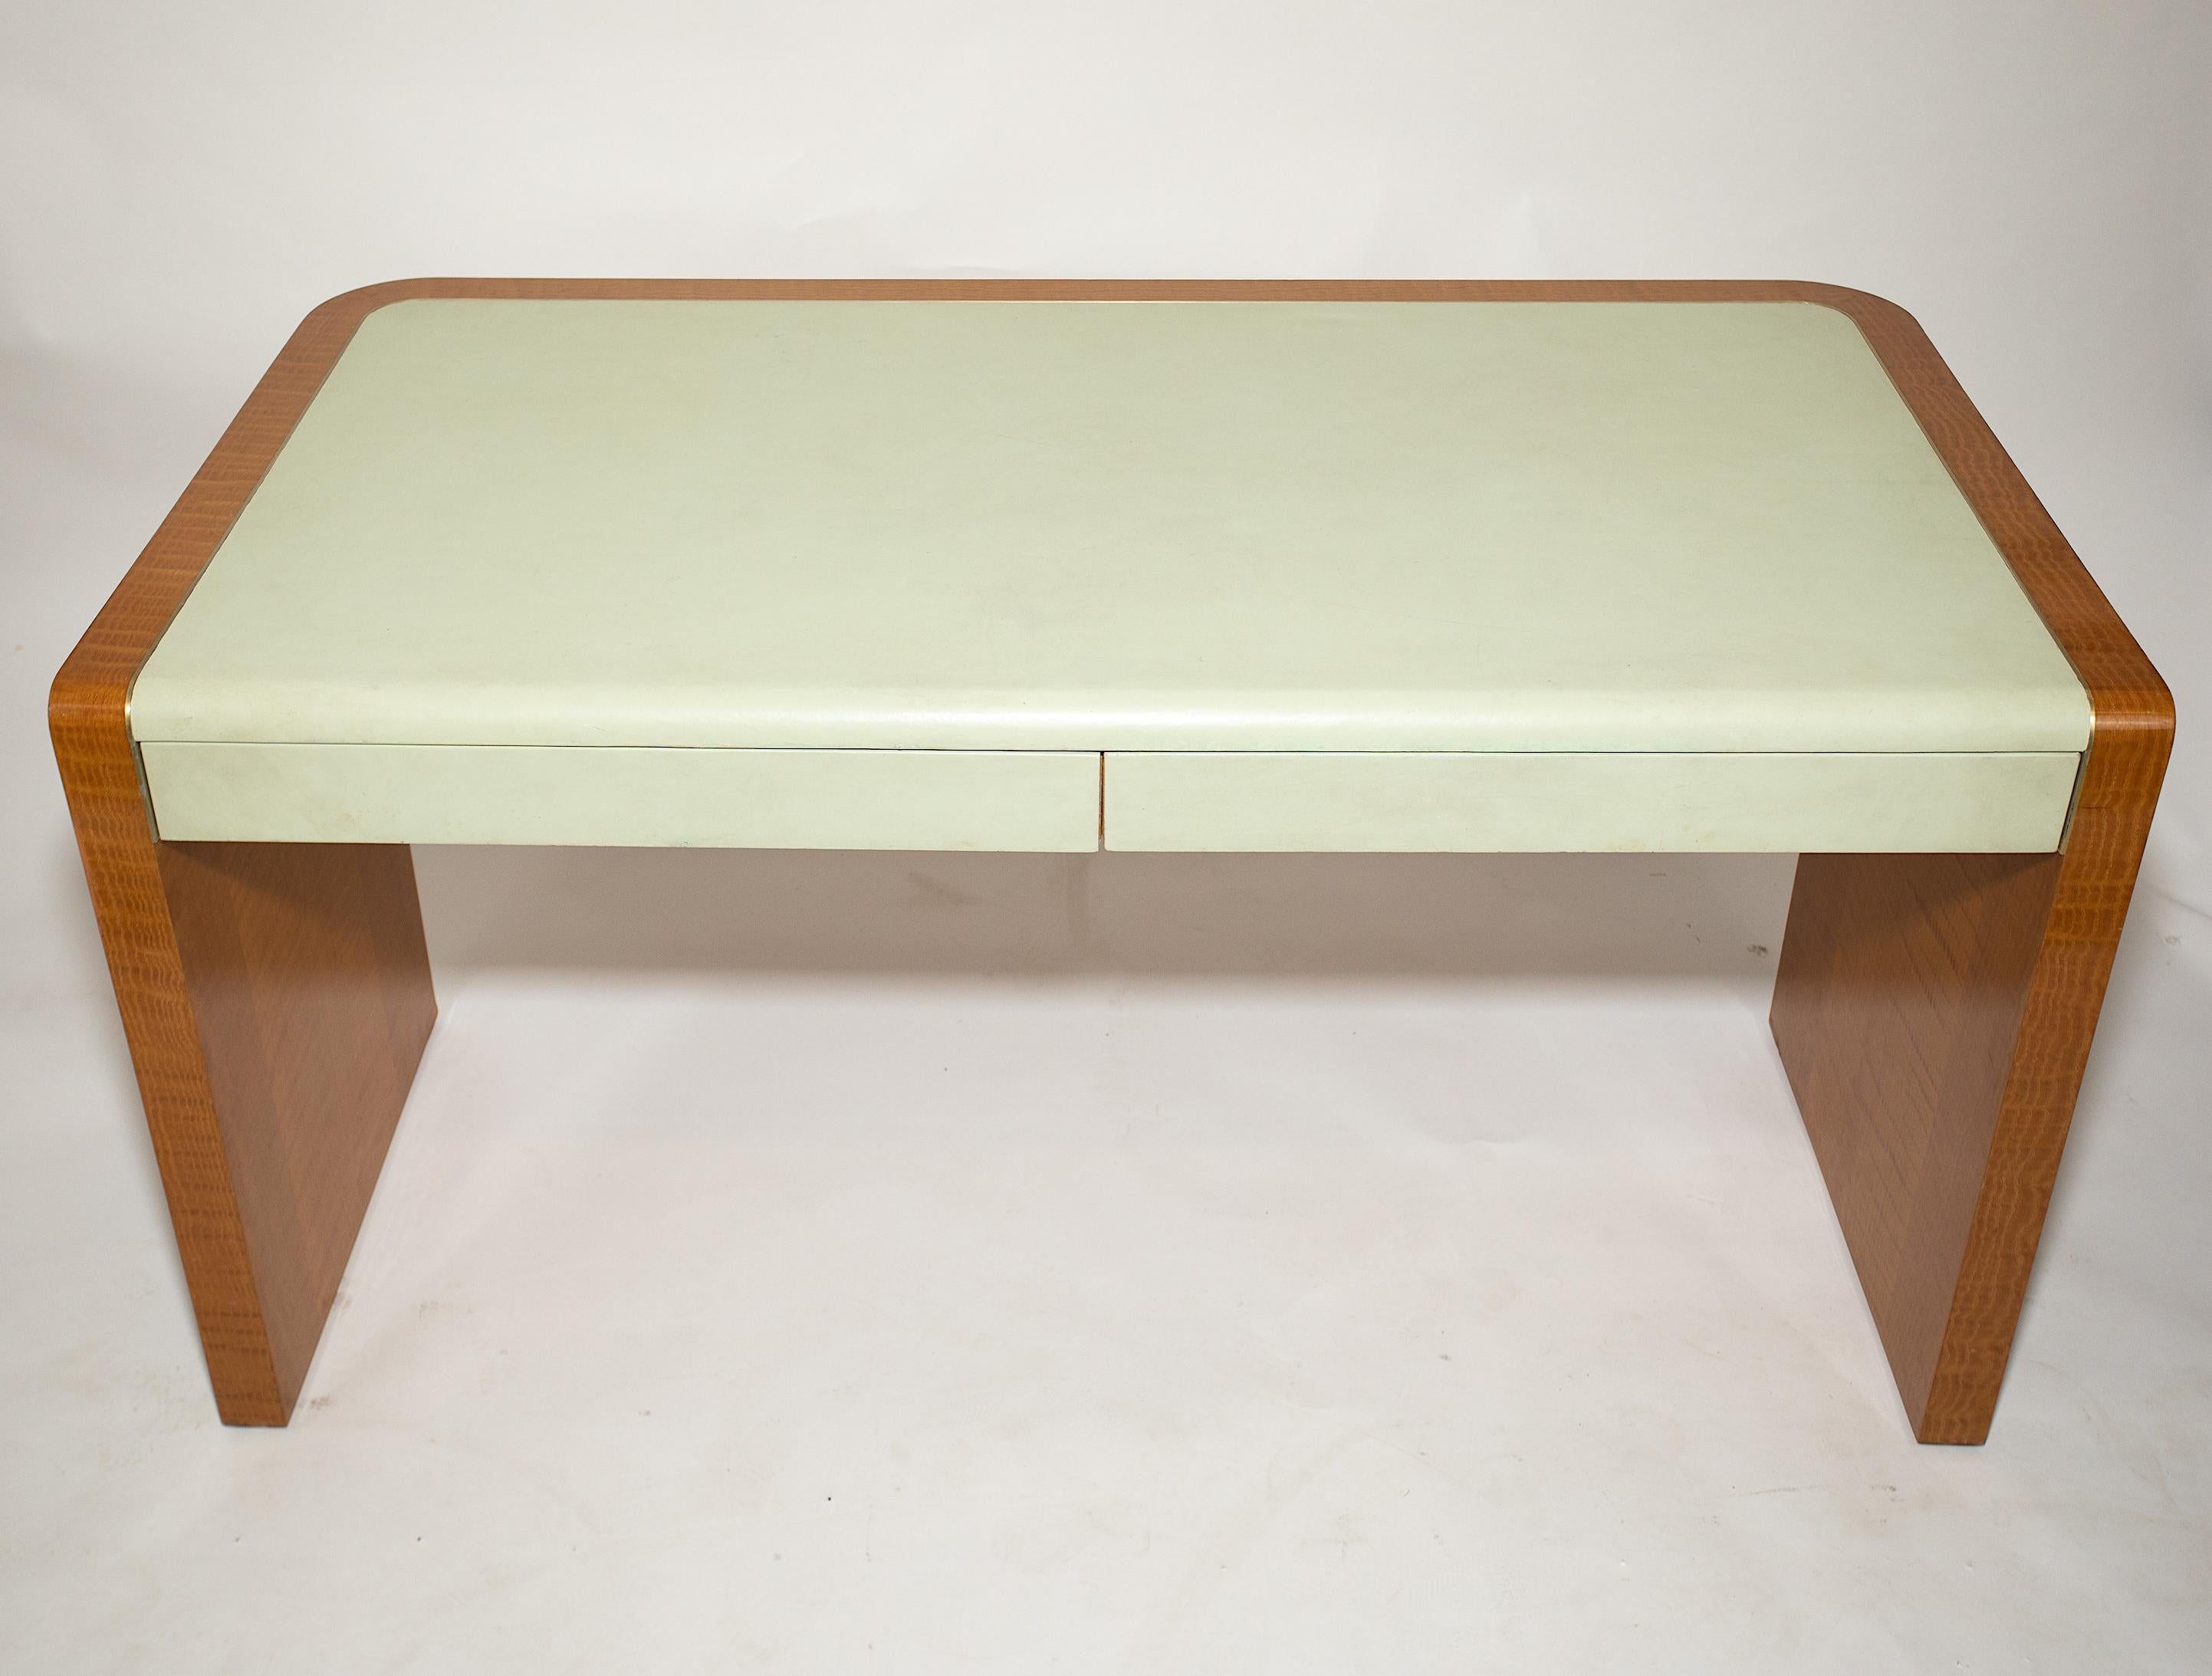 A Vladimir Kagan Desk.
Quilted maple, brass and Leather.
Beautiful Pistachio color Leather.
Label present.